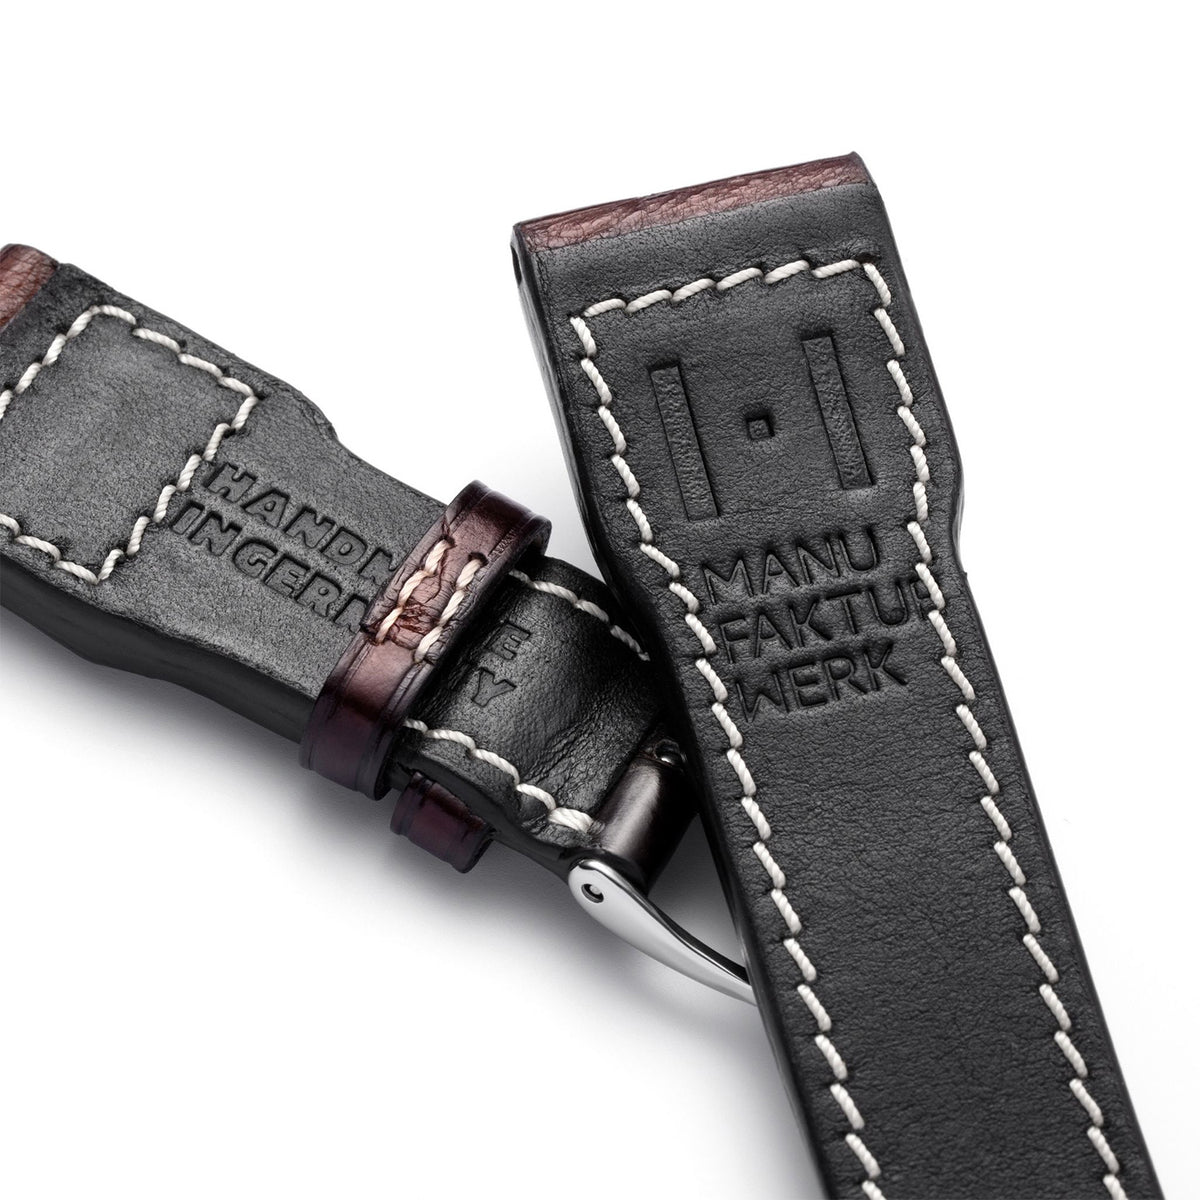 Alligator watch strap for large pilot&#39;s watch - compatible strap for the IWC BIG PILOT (strap not from IWC) - silver clasp